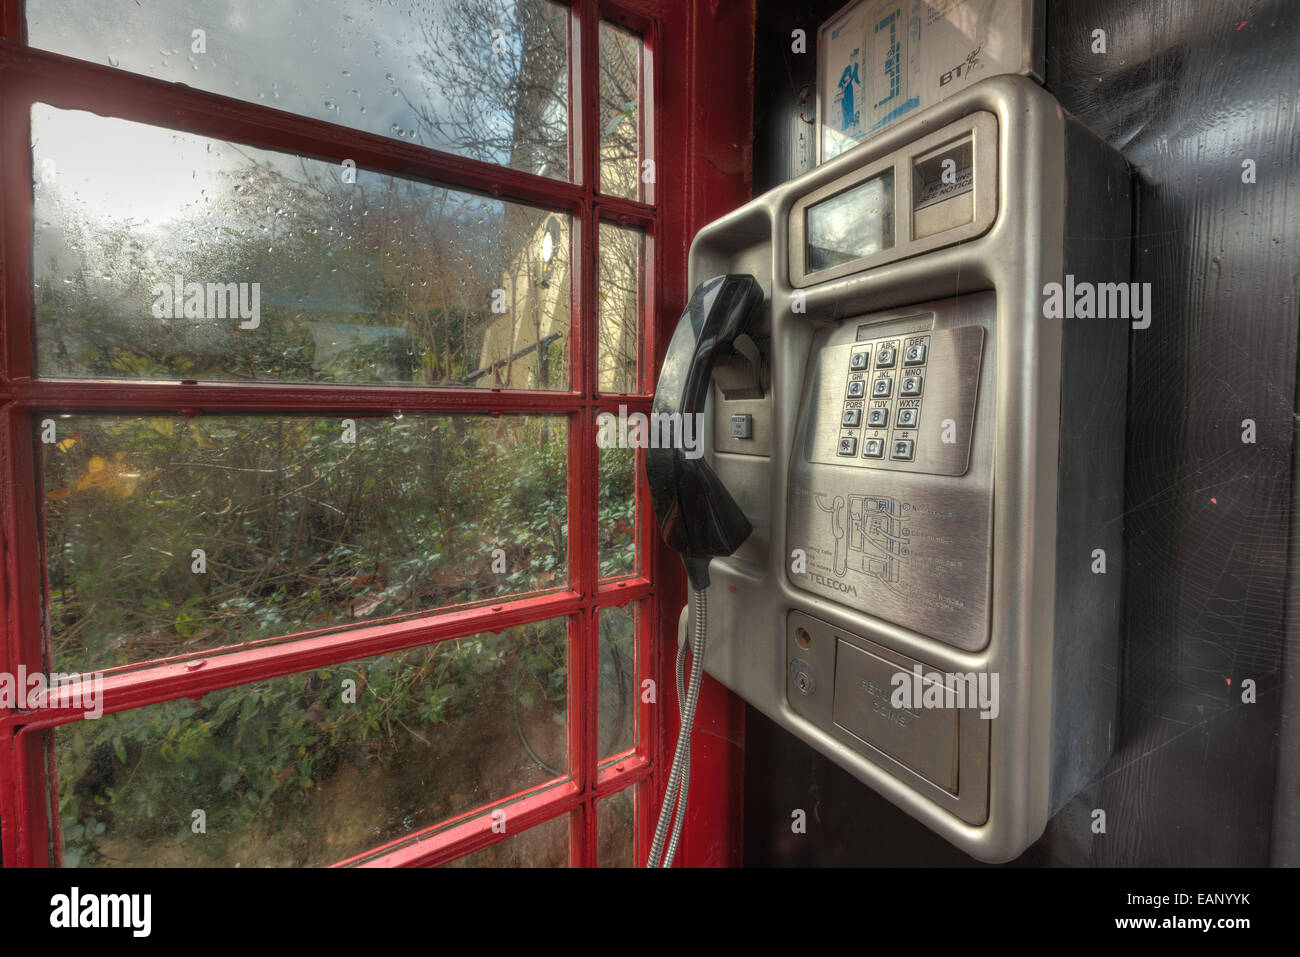 traditional old fashioned unused red telephone box illustrating changing communication cultures and redundant old technology Stock Photo